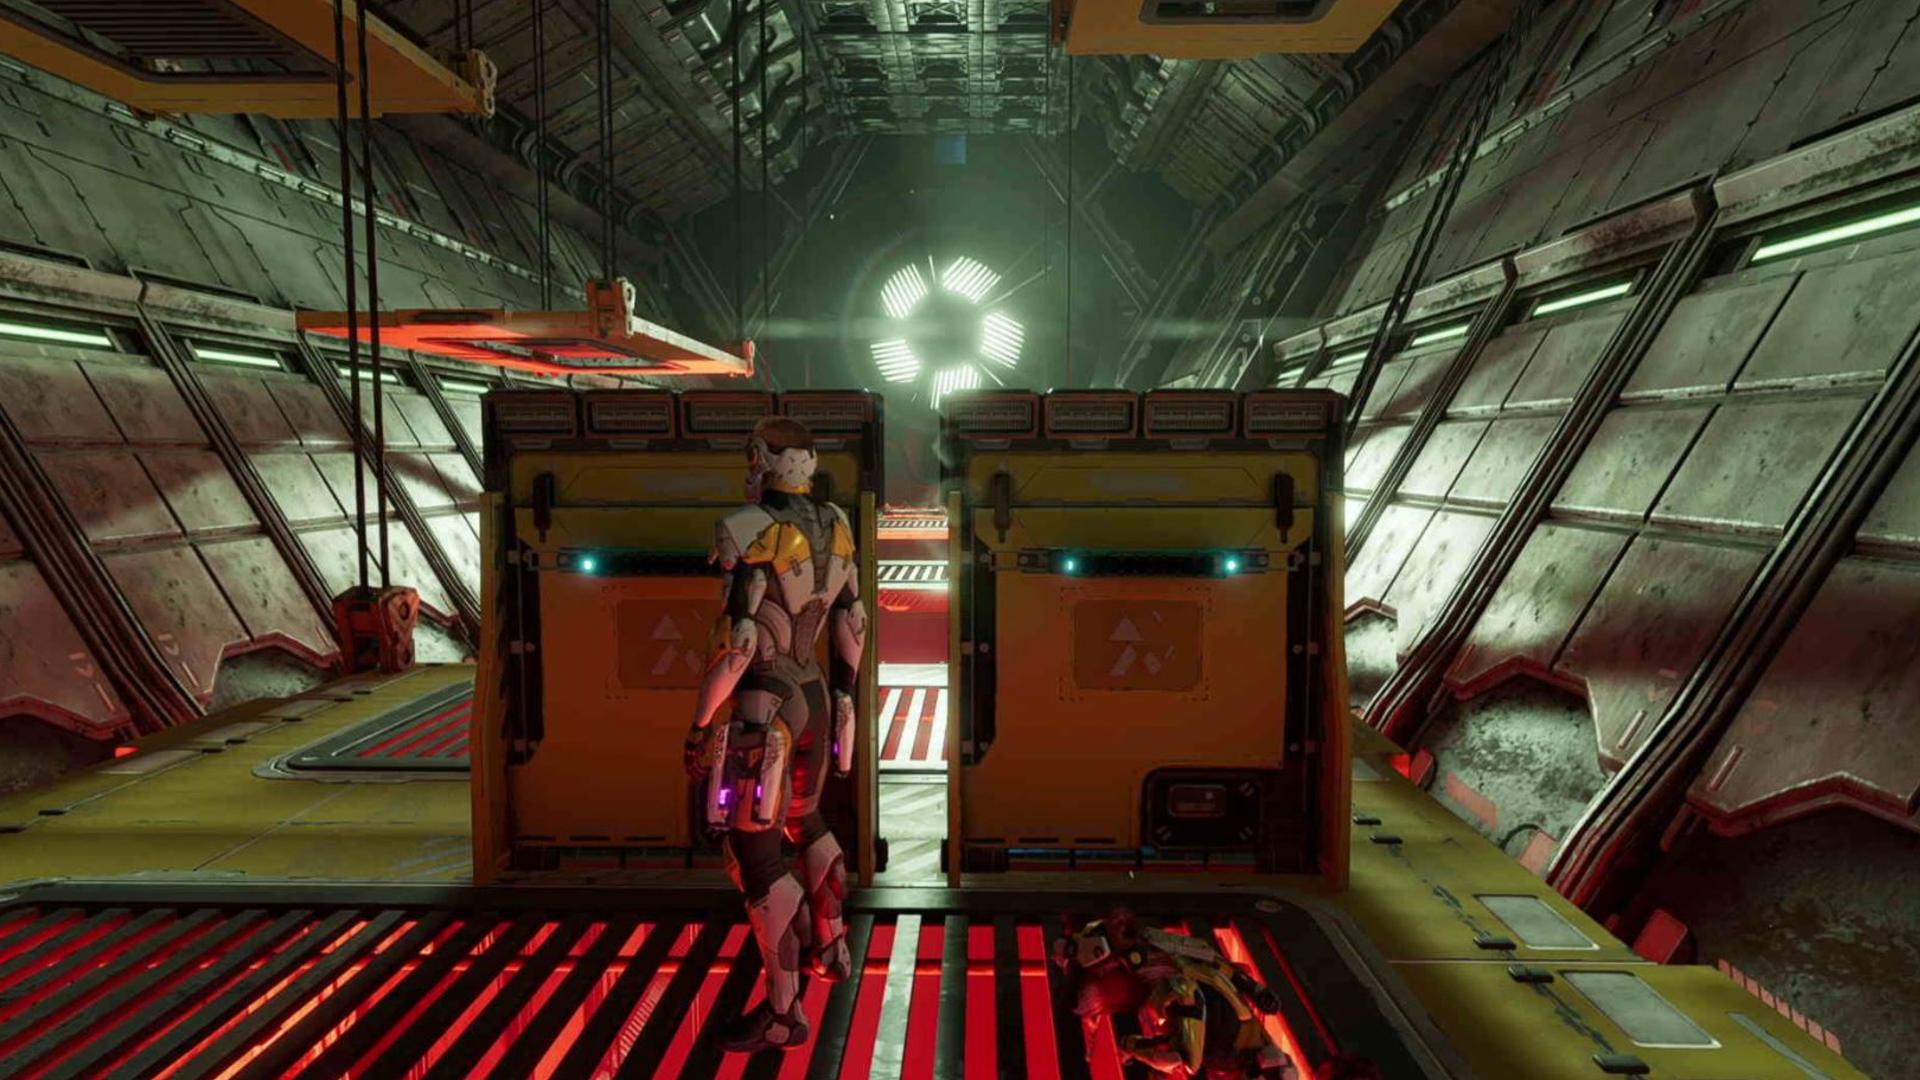 Guardians of the Galaxy outfit locations: Star-Lord can be seen standing in the wind tunnel.